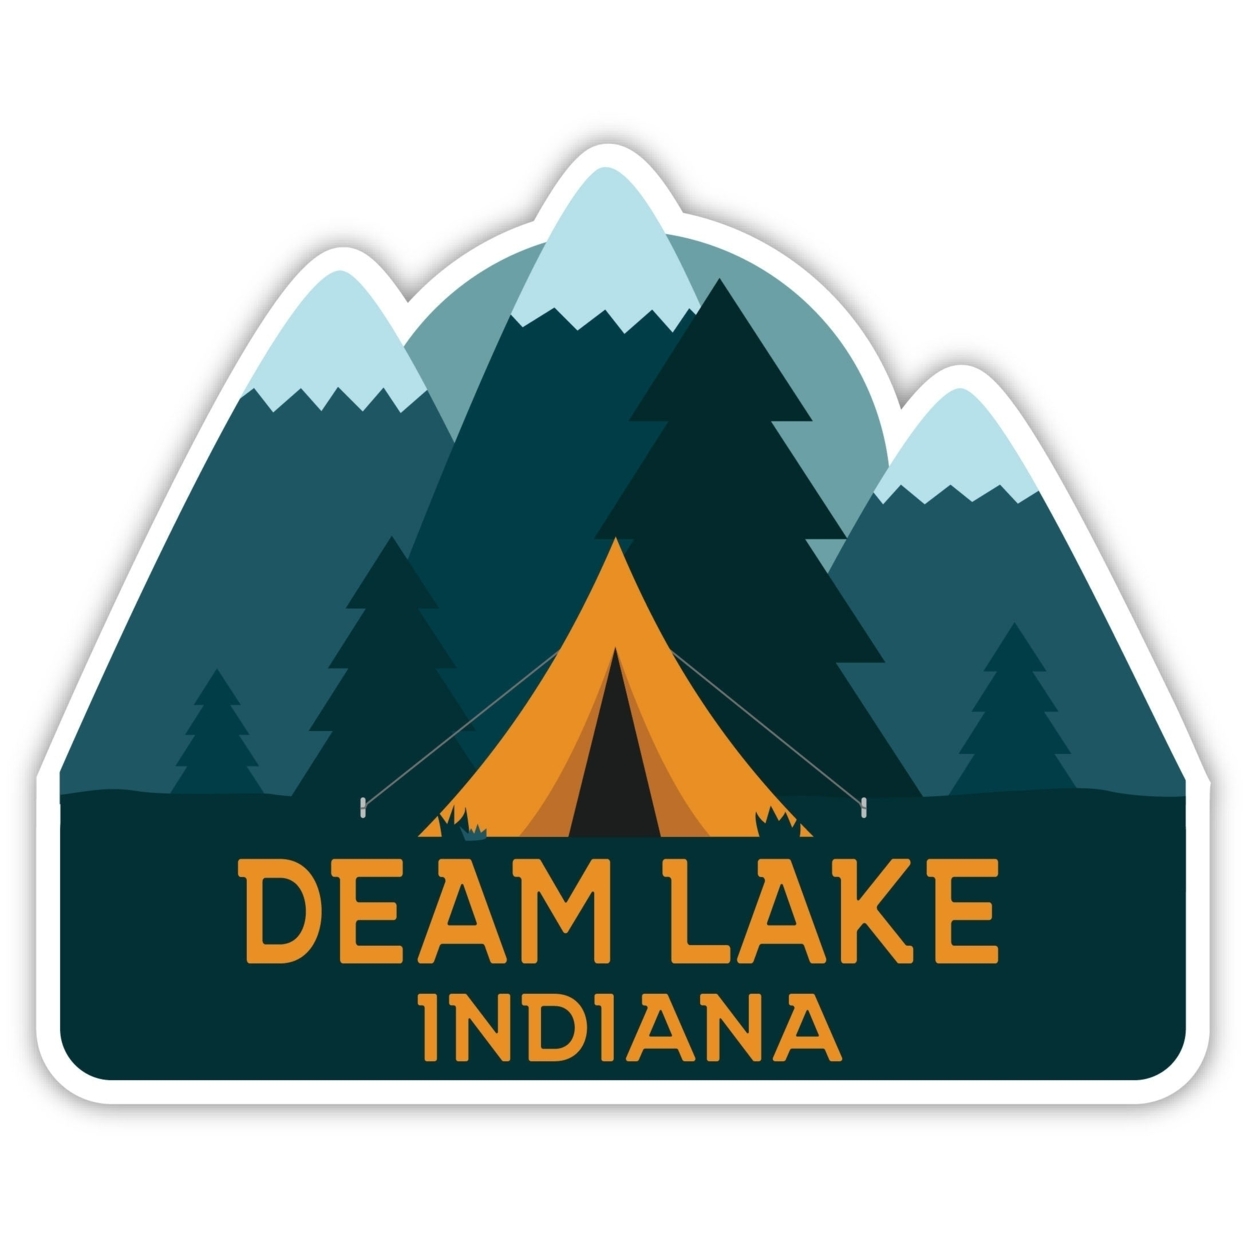 Deam Lake Indiana Souvenir Decorative Stickers (Choose Theme And Size) - 4-Pack, 4-Inch, Tent